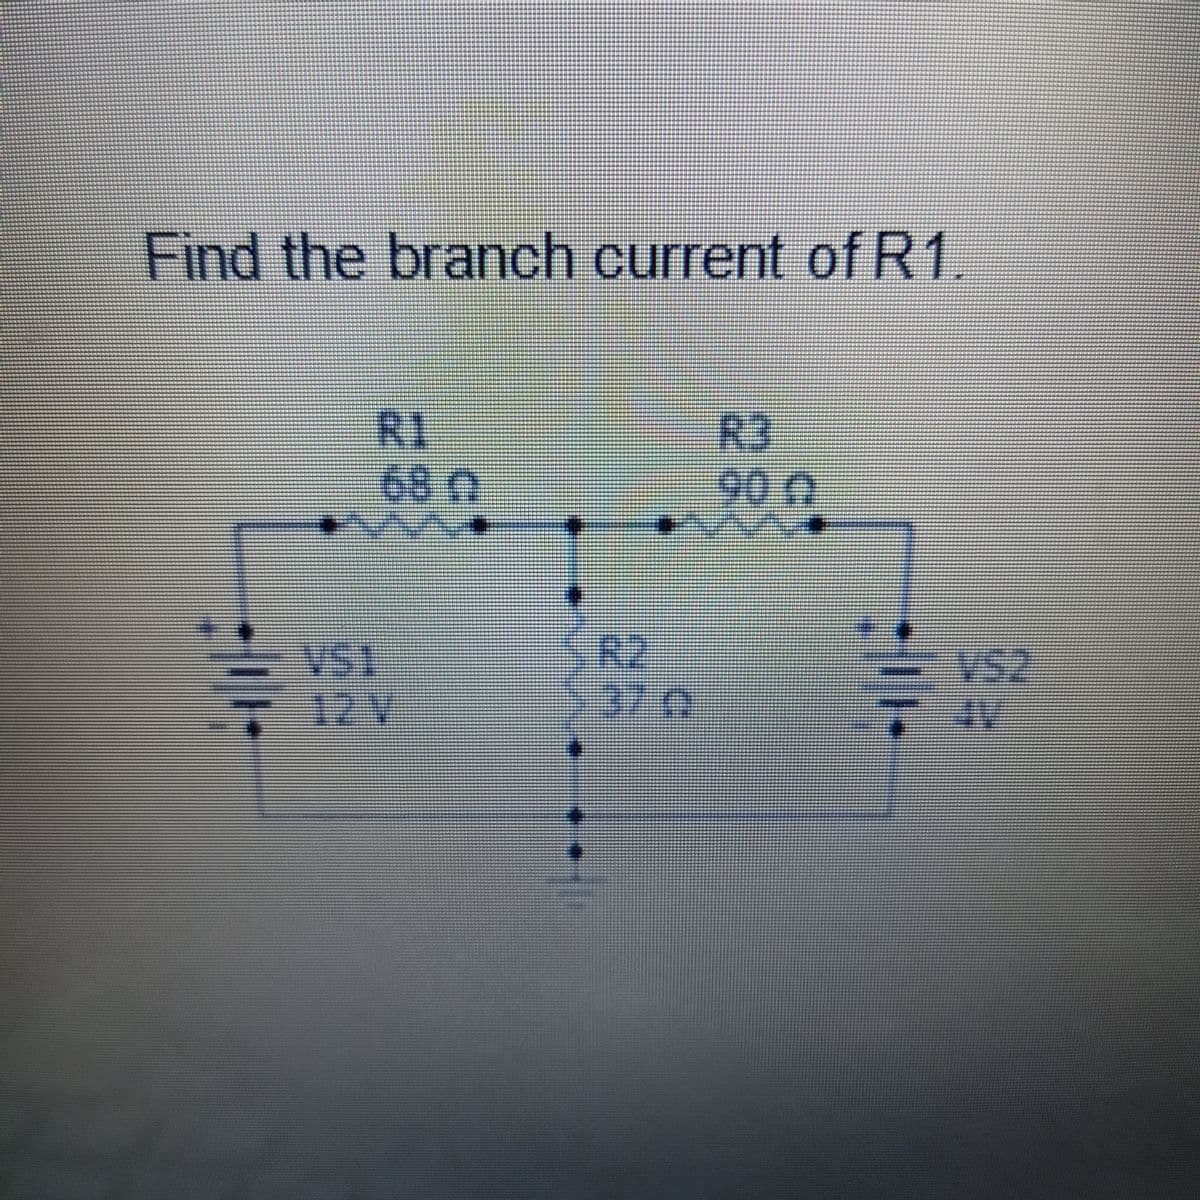 Find the branch current of R1.
400-
RI
680
1
R2
R3
900
|-|-